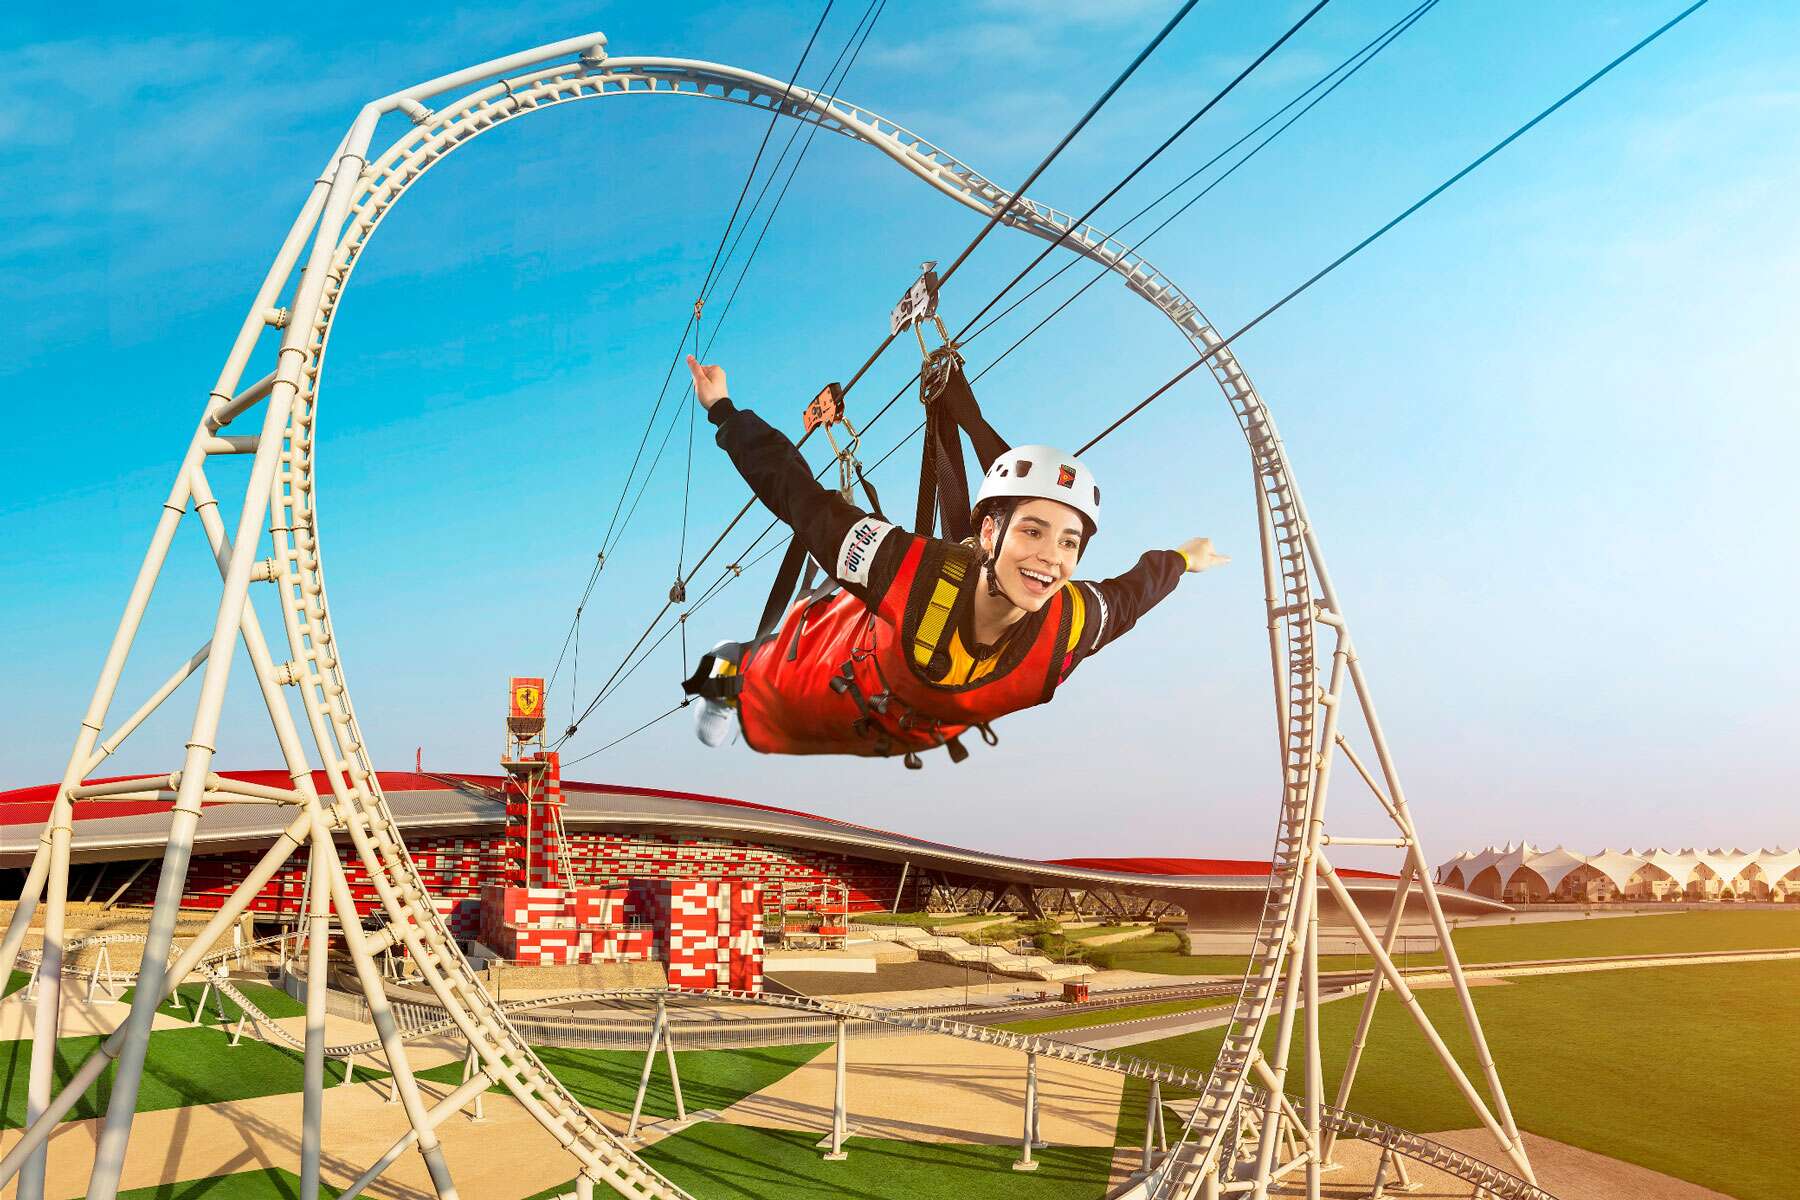 Ferrari World's New High Speed Zip Line Will Give Its Cars A Run For Their Money. Travel + Leisure